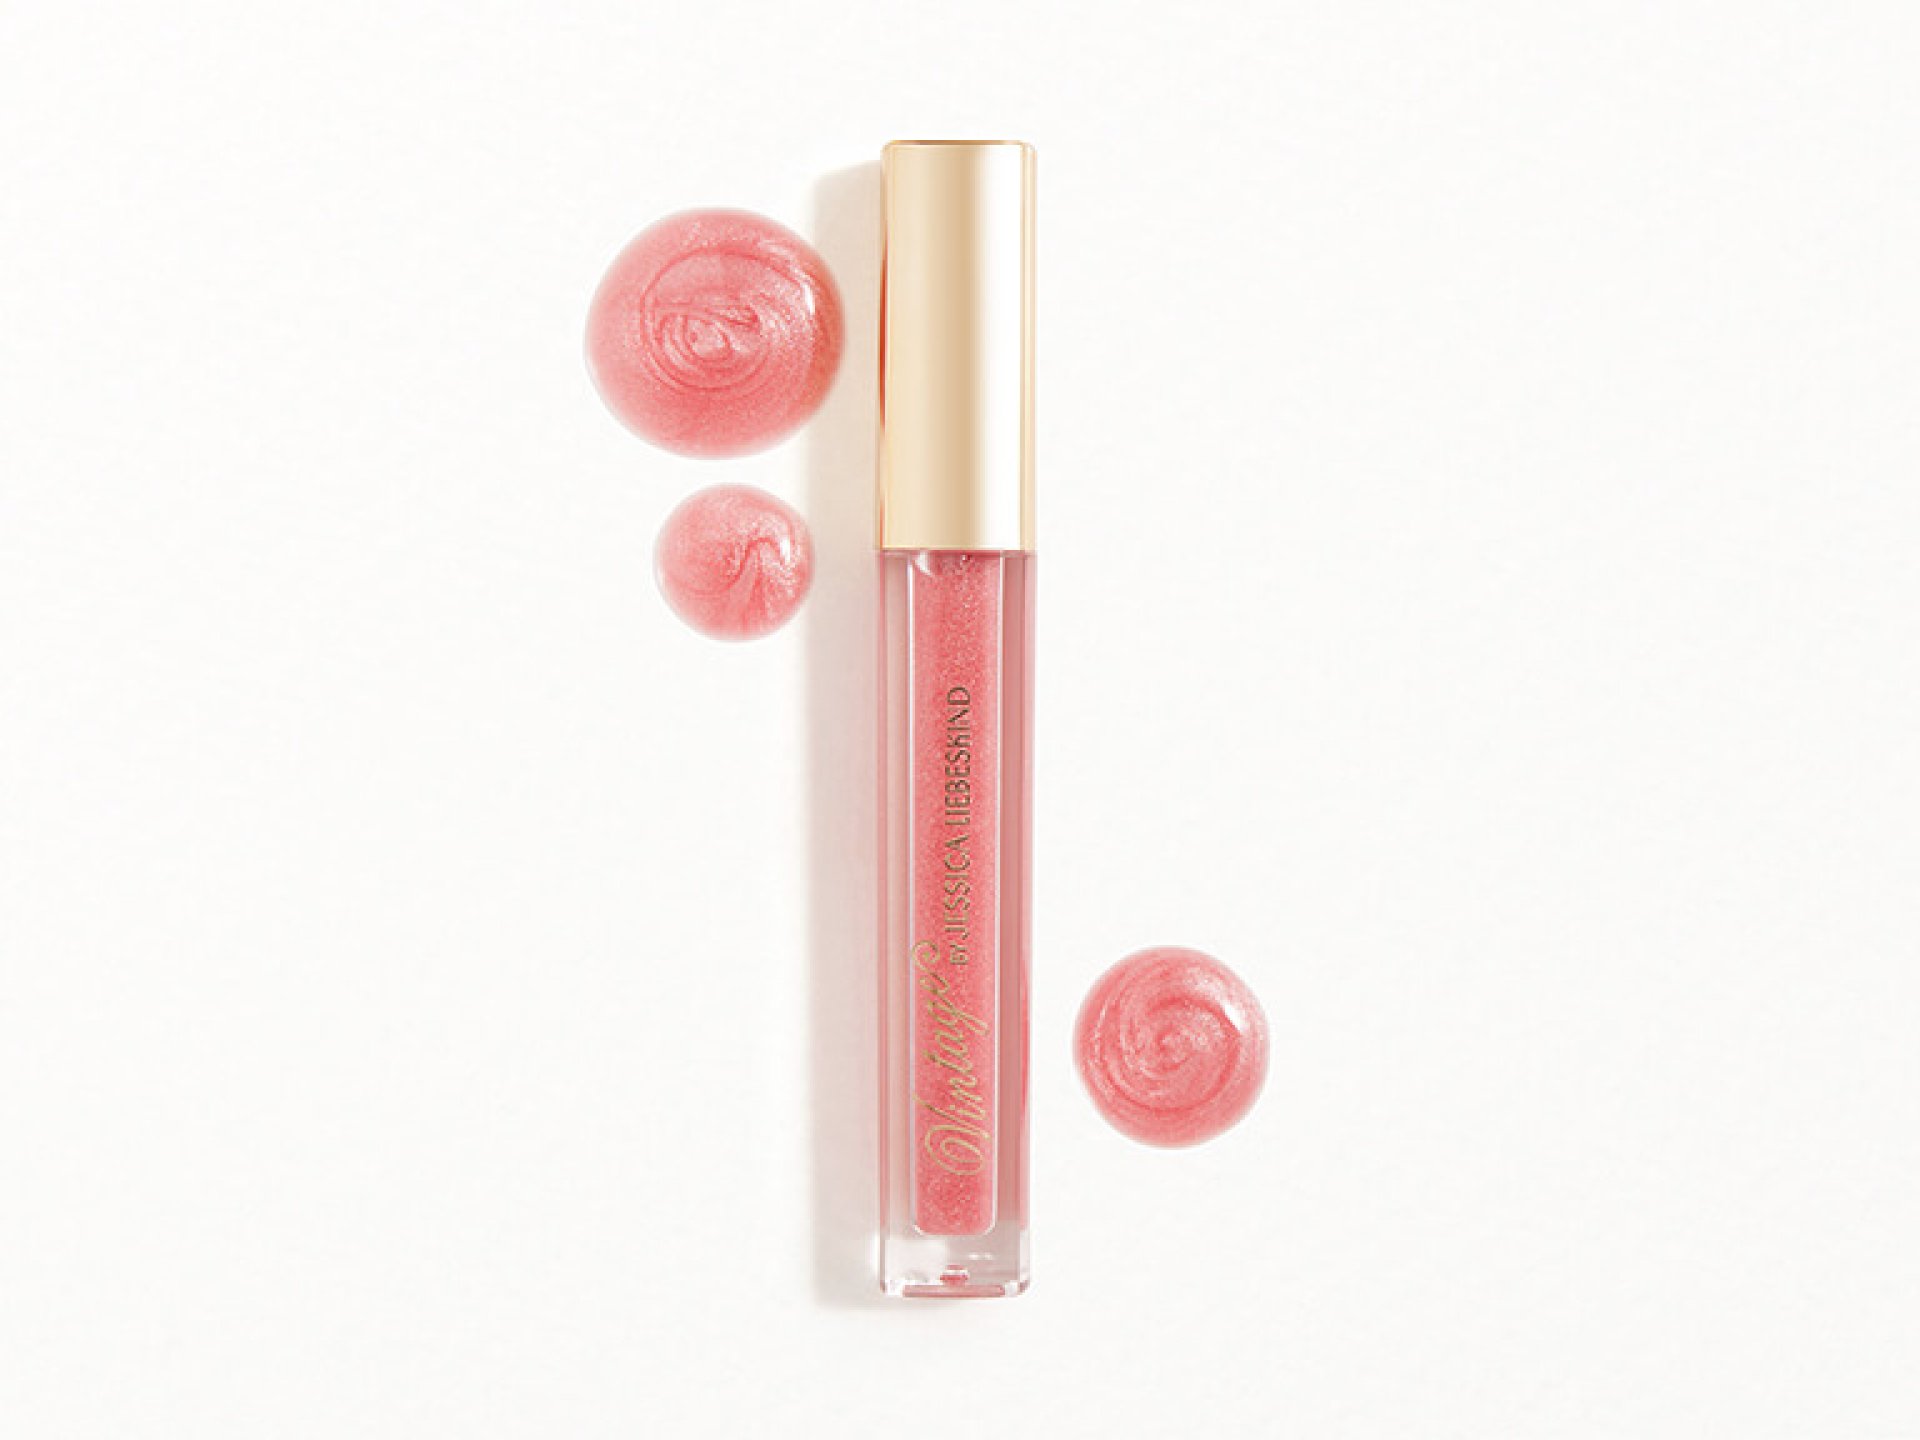 VINTAGE BY JESSICA LIEBESKIND Sparkling Lip Gloss in Pink Sequin